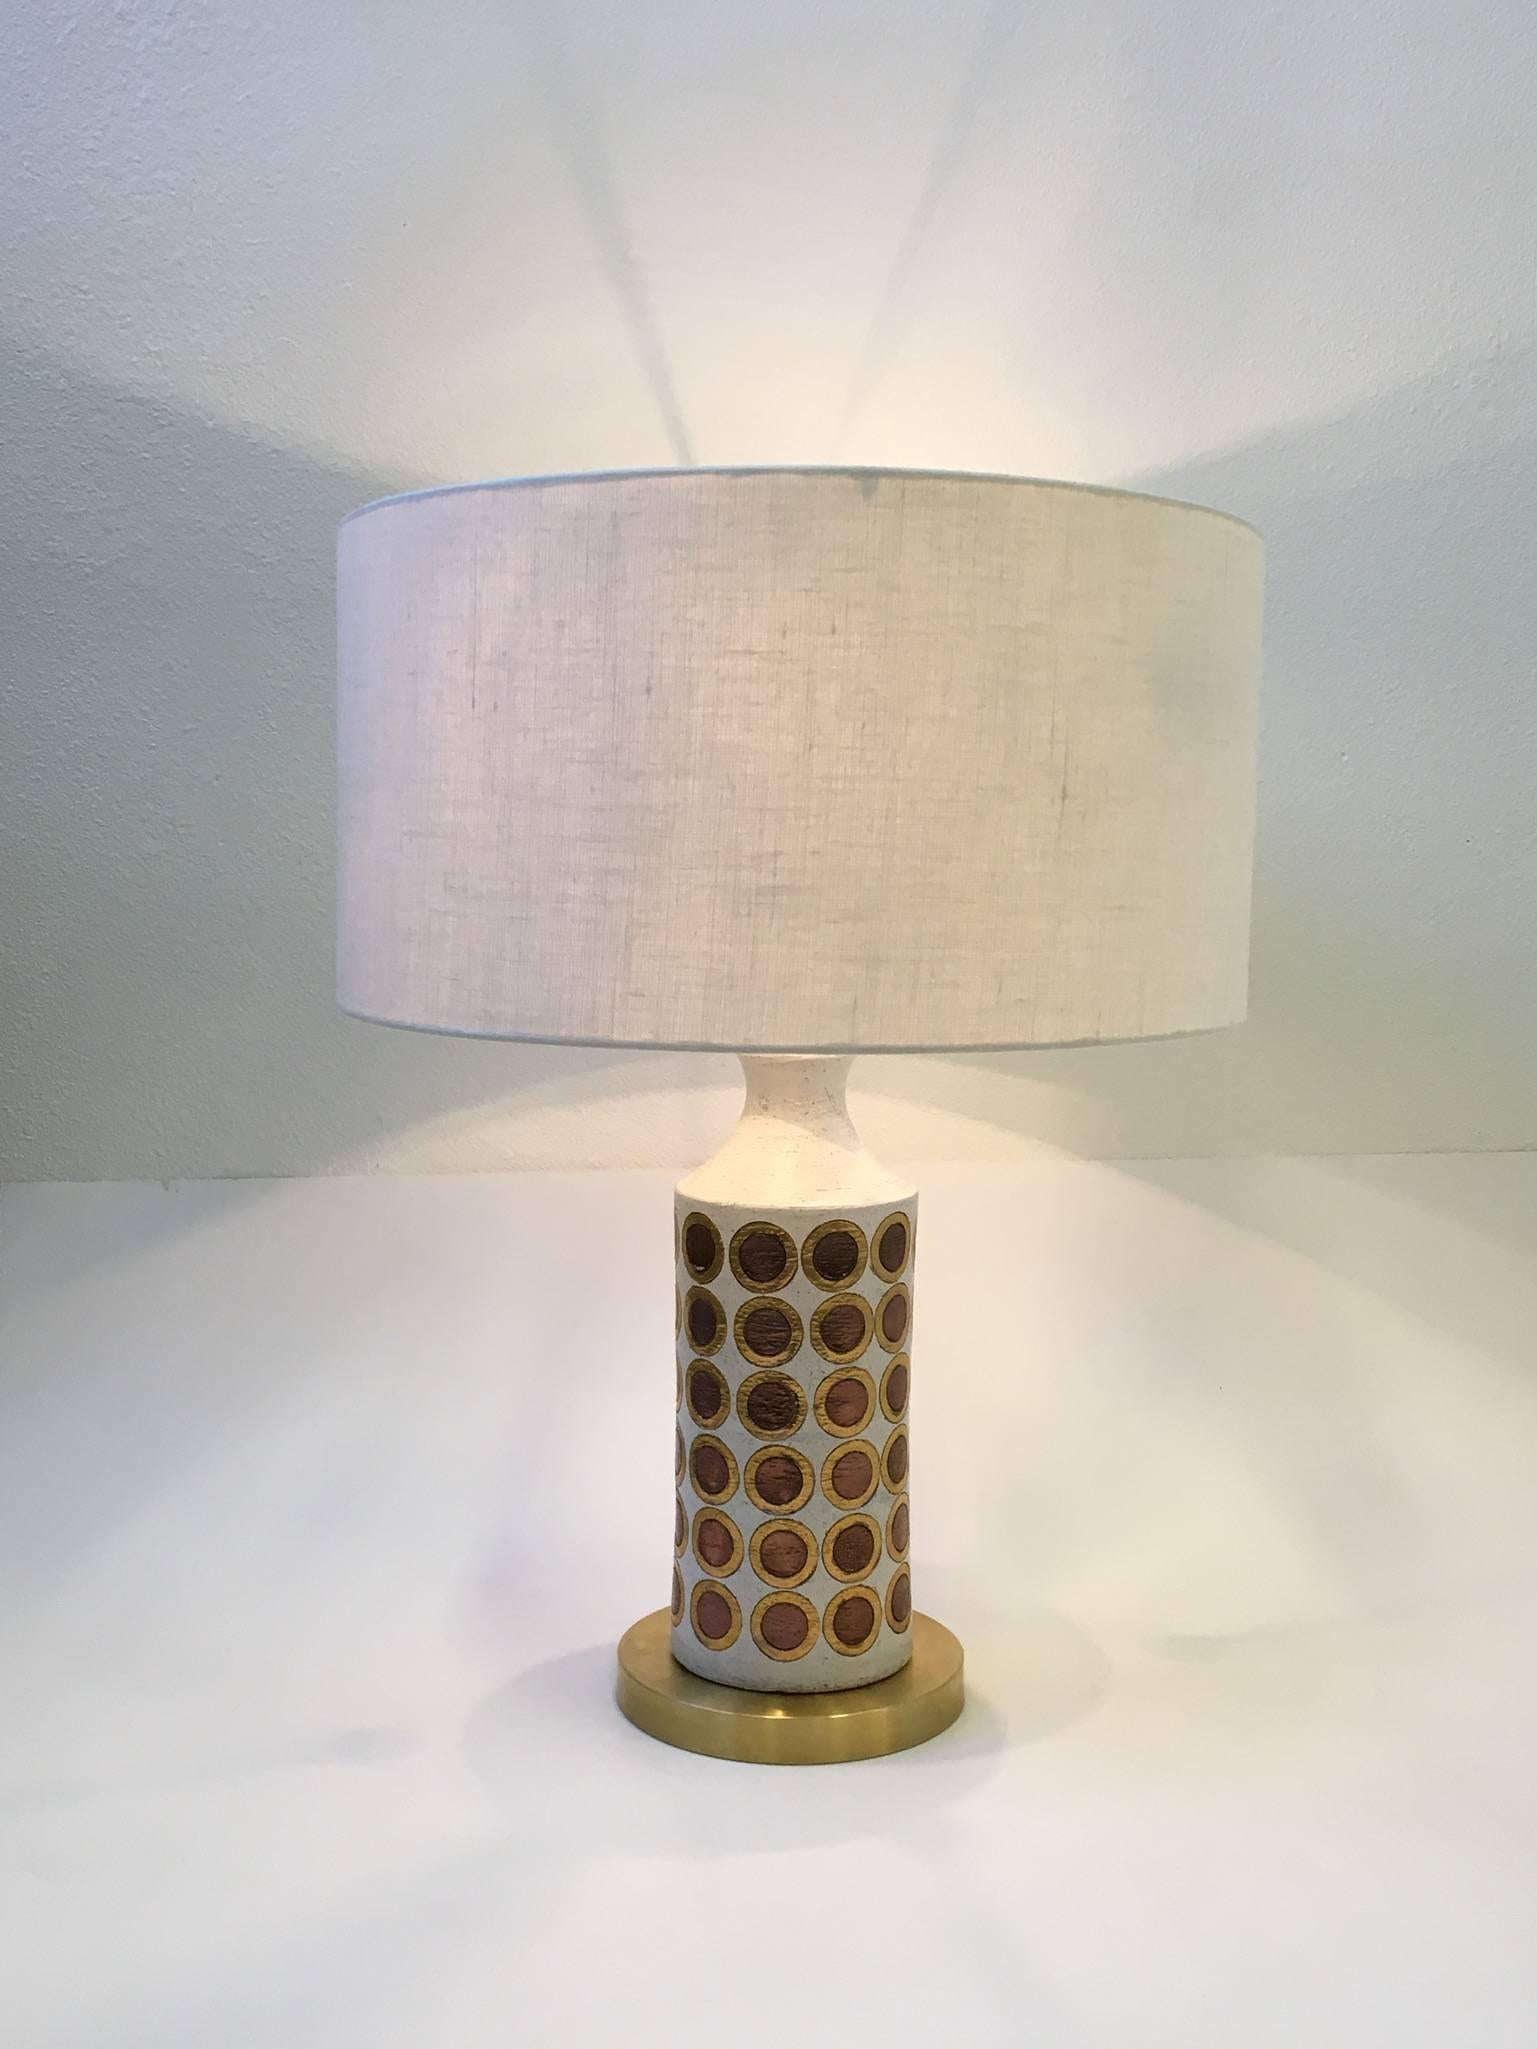 Mid-20th Century Italian Ceramic and Brass Table Lamp by Bitossi For Sale